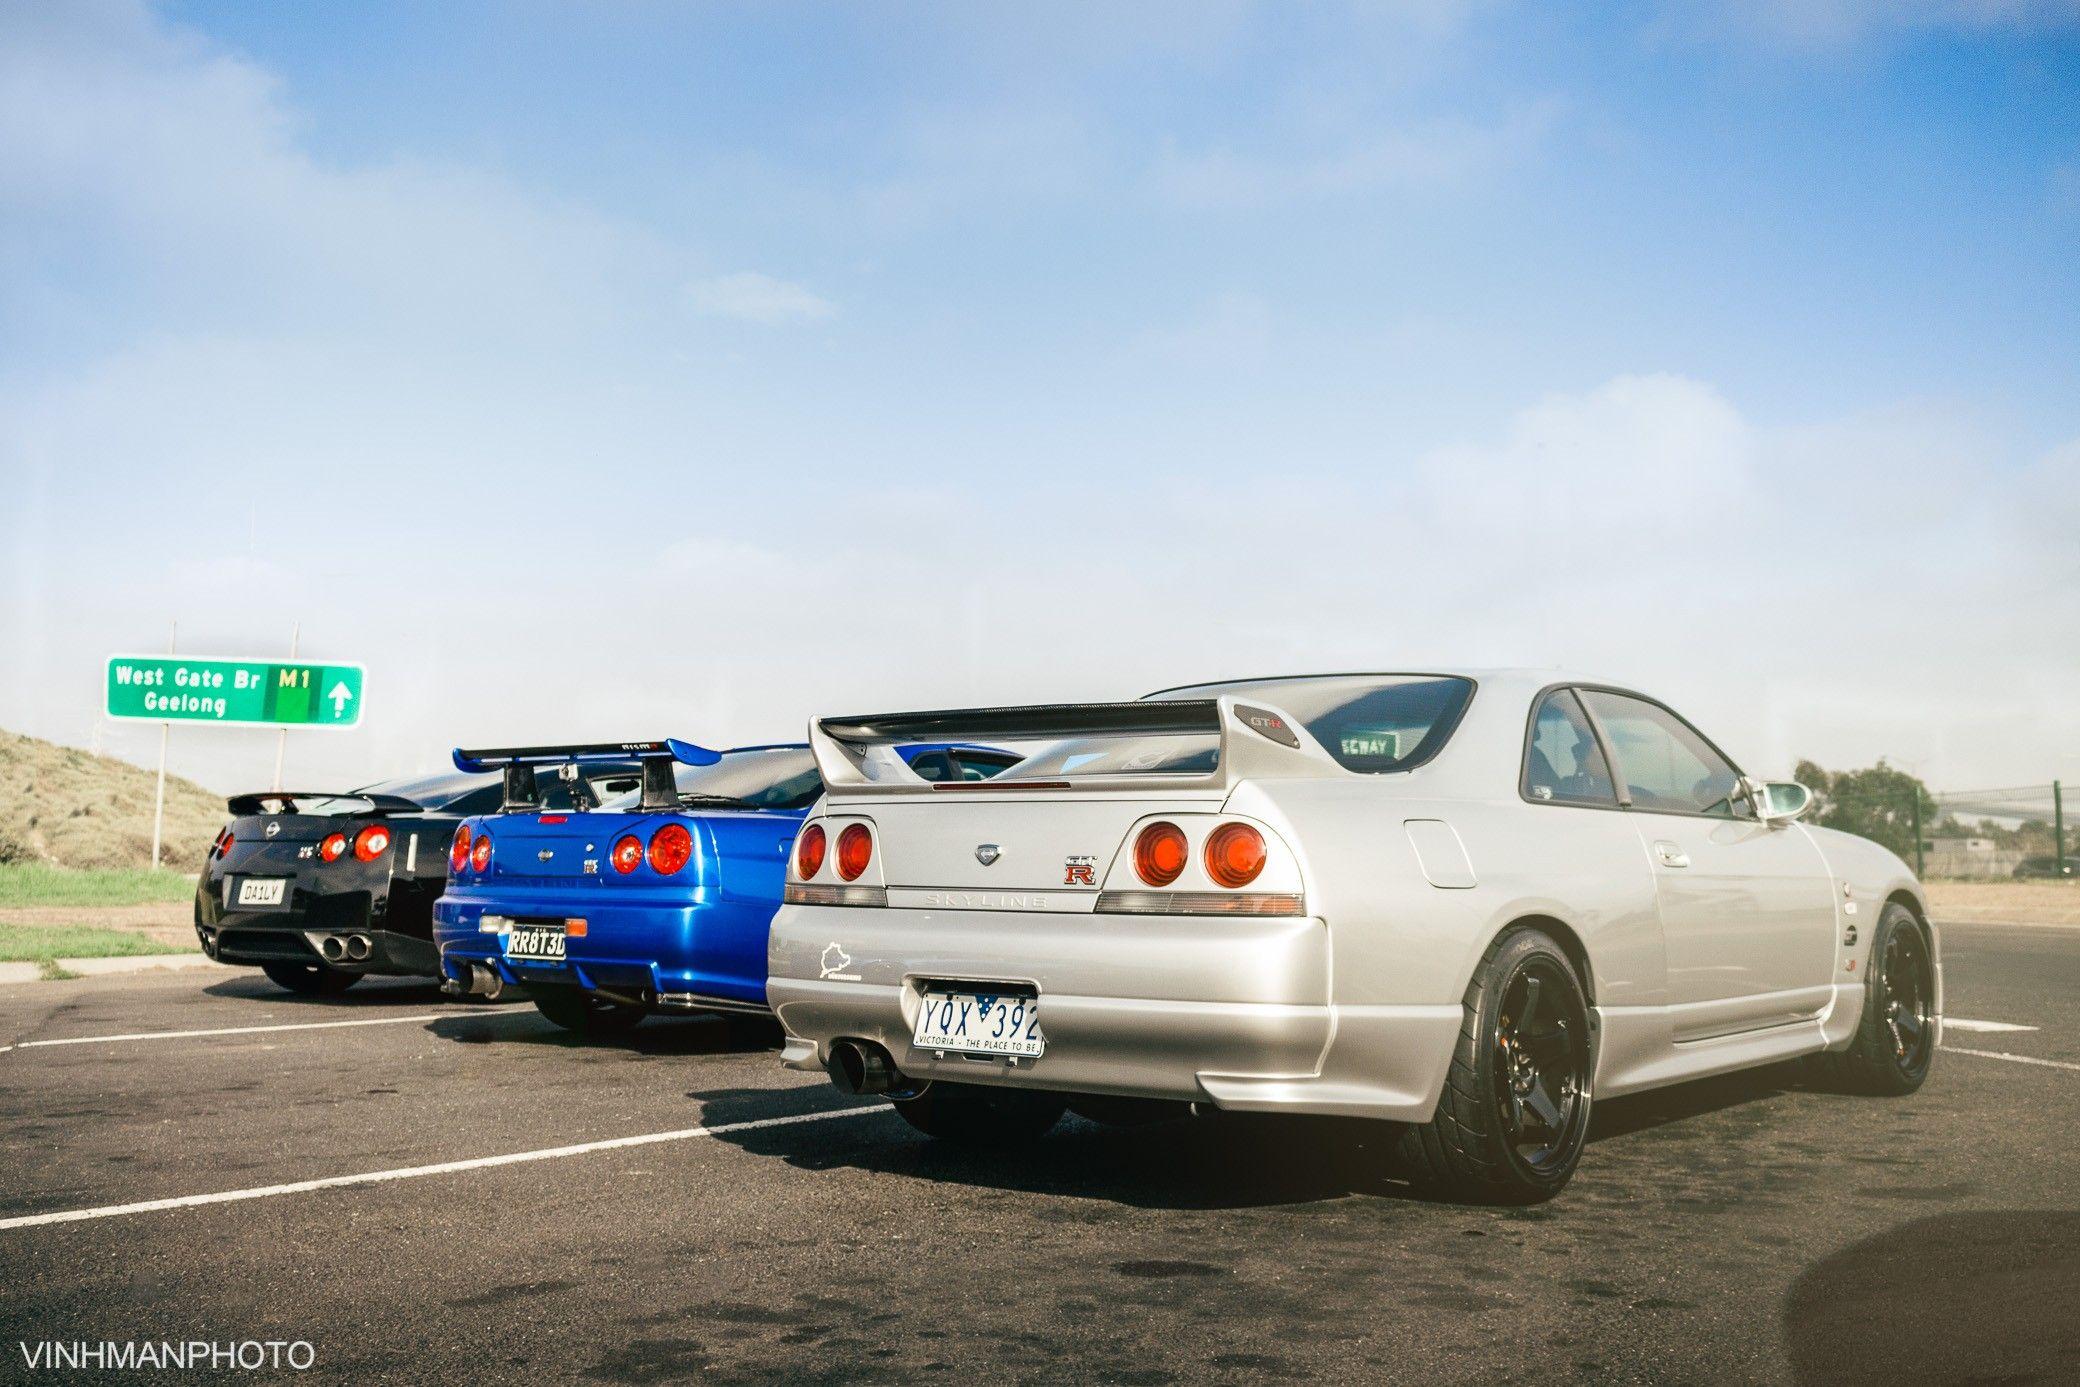 Nissan Skyline R33 Wallpapers Top Free Nissan Skyline R33 Backgrounds Wallpaperaccess